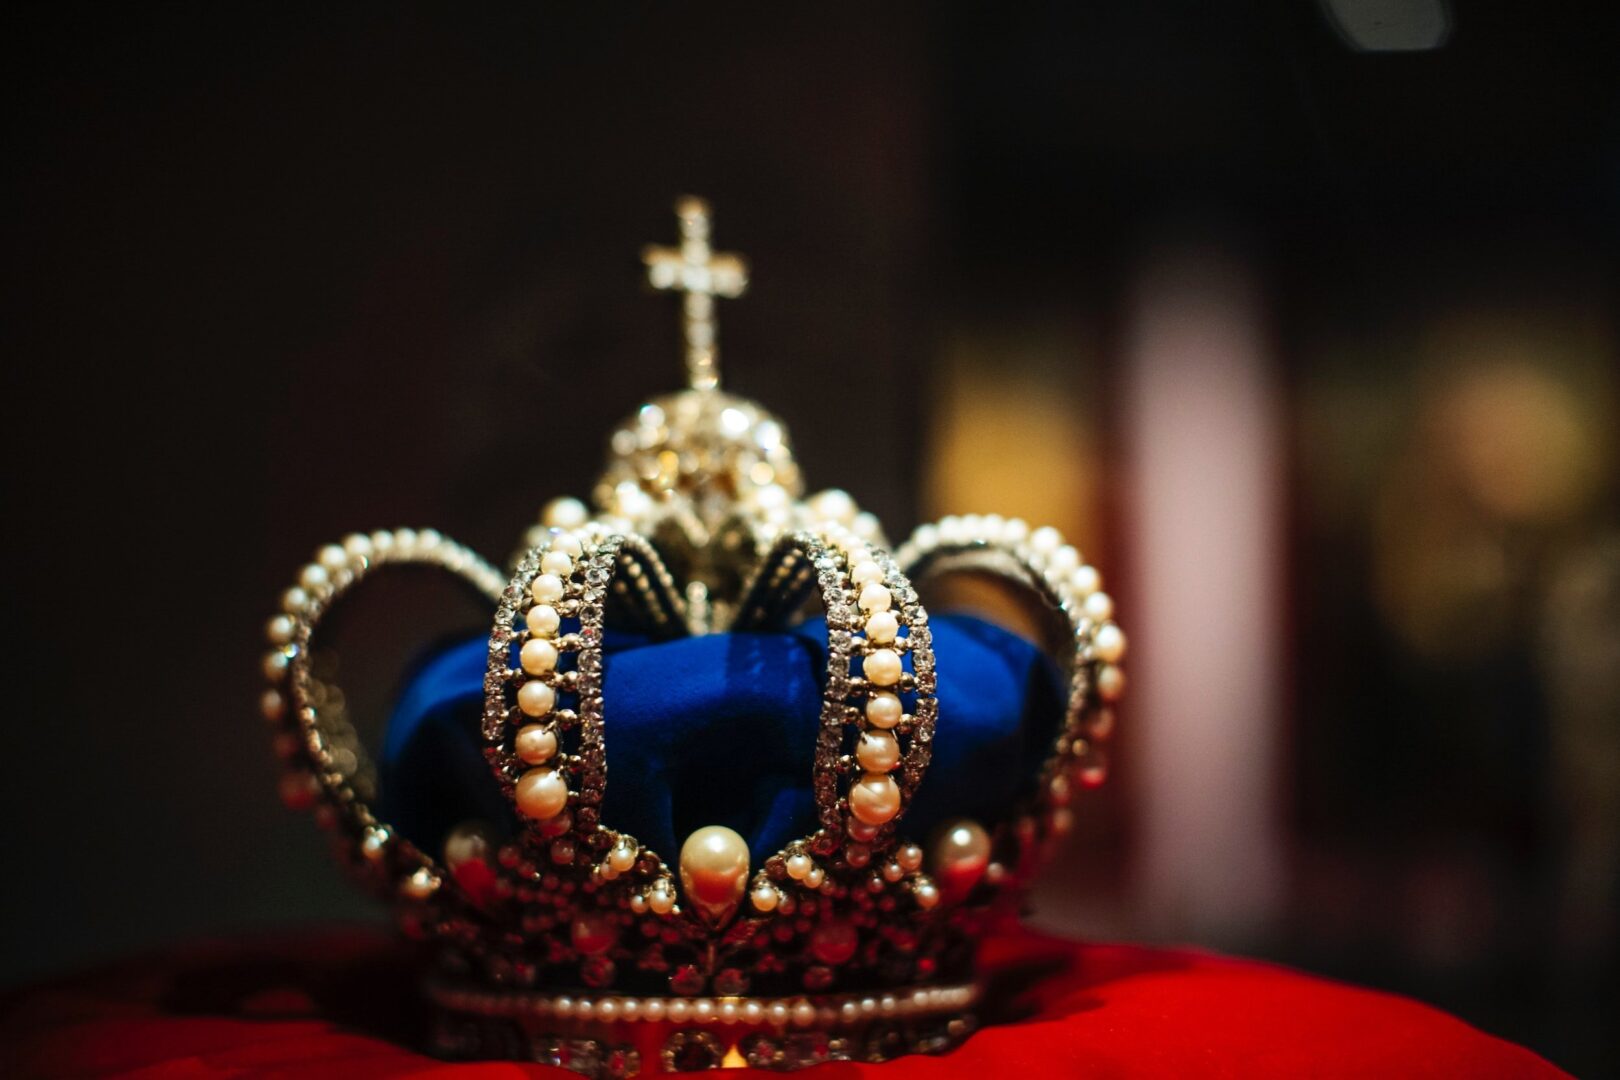 A blue and gold crown sits on top of a red cloth.